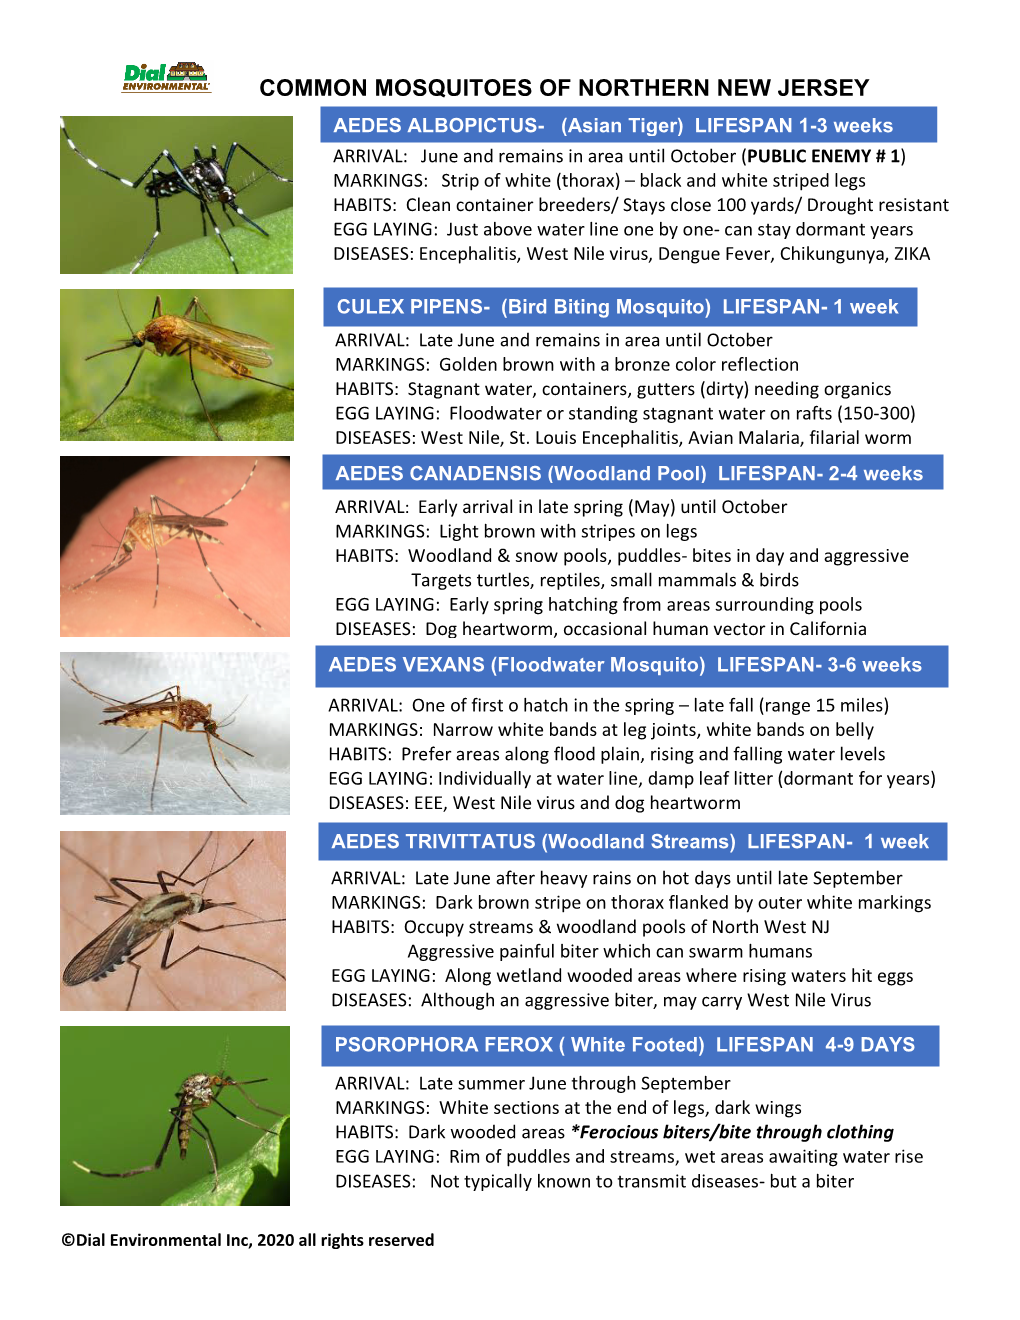 Common Mosquitoes of Northern New Jersey